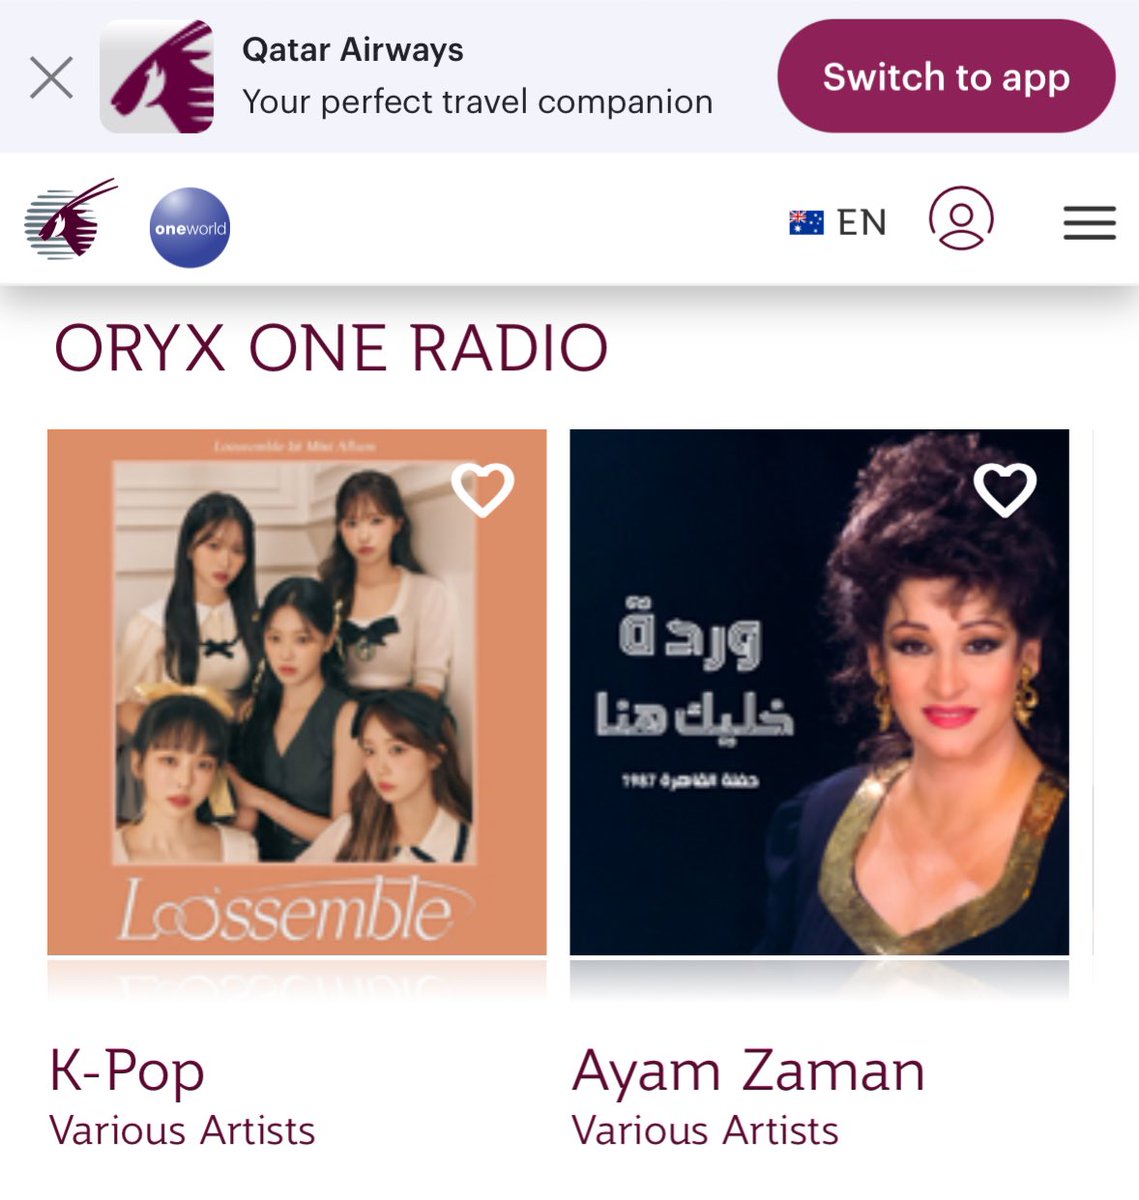 Loossemble are featured as the cover for Qatar Airways “Oryx One Radio - K-Pop (Various Artists)”

#루셈블 #LOOSSEMBLE